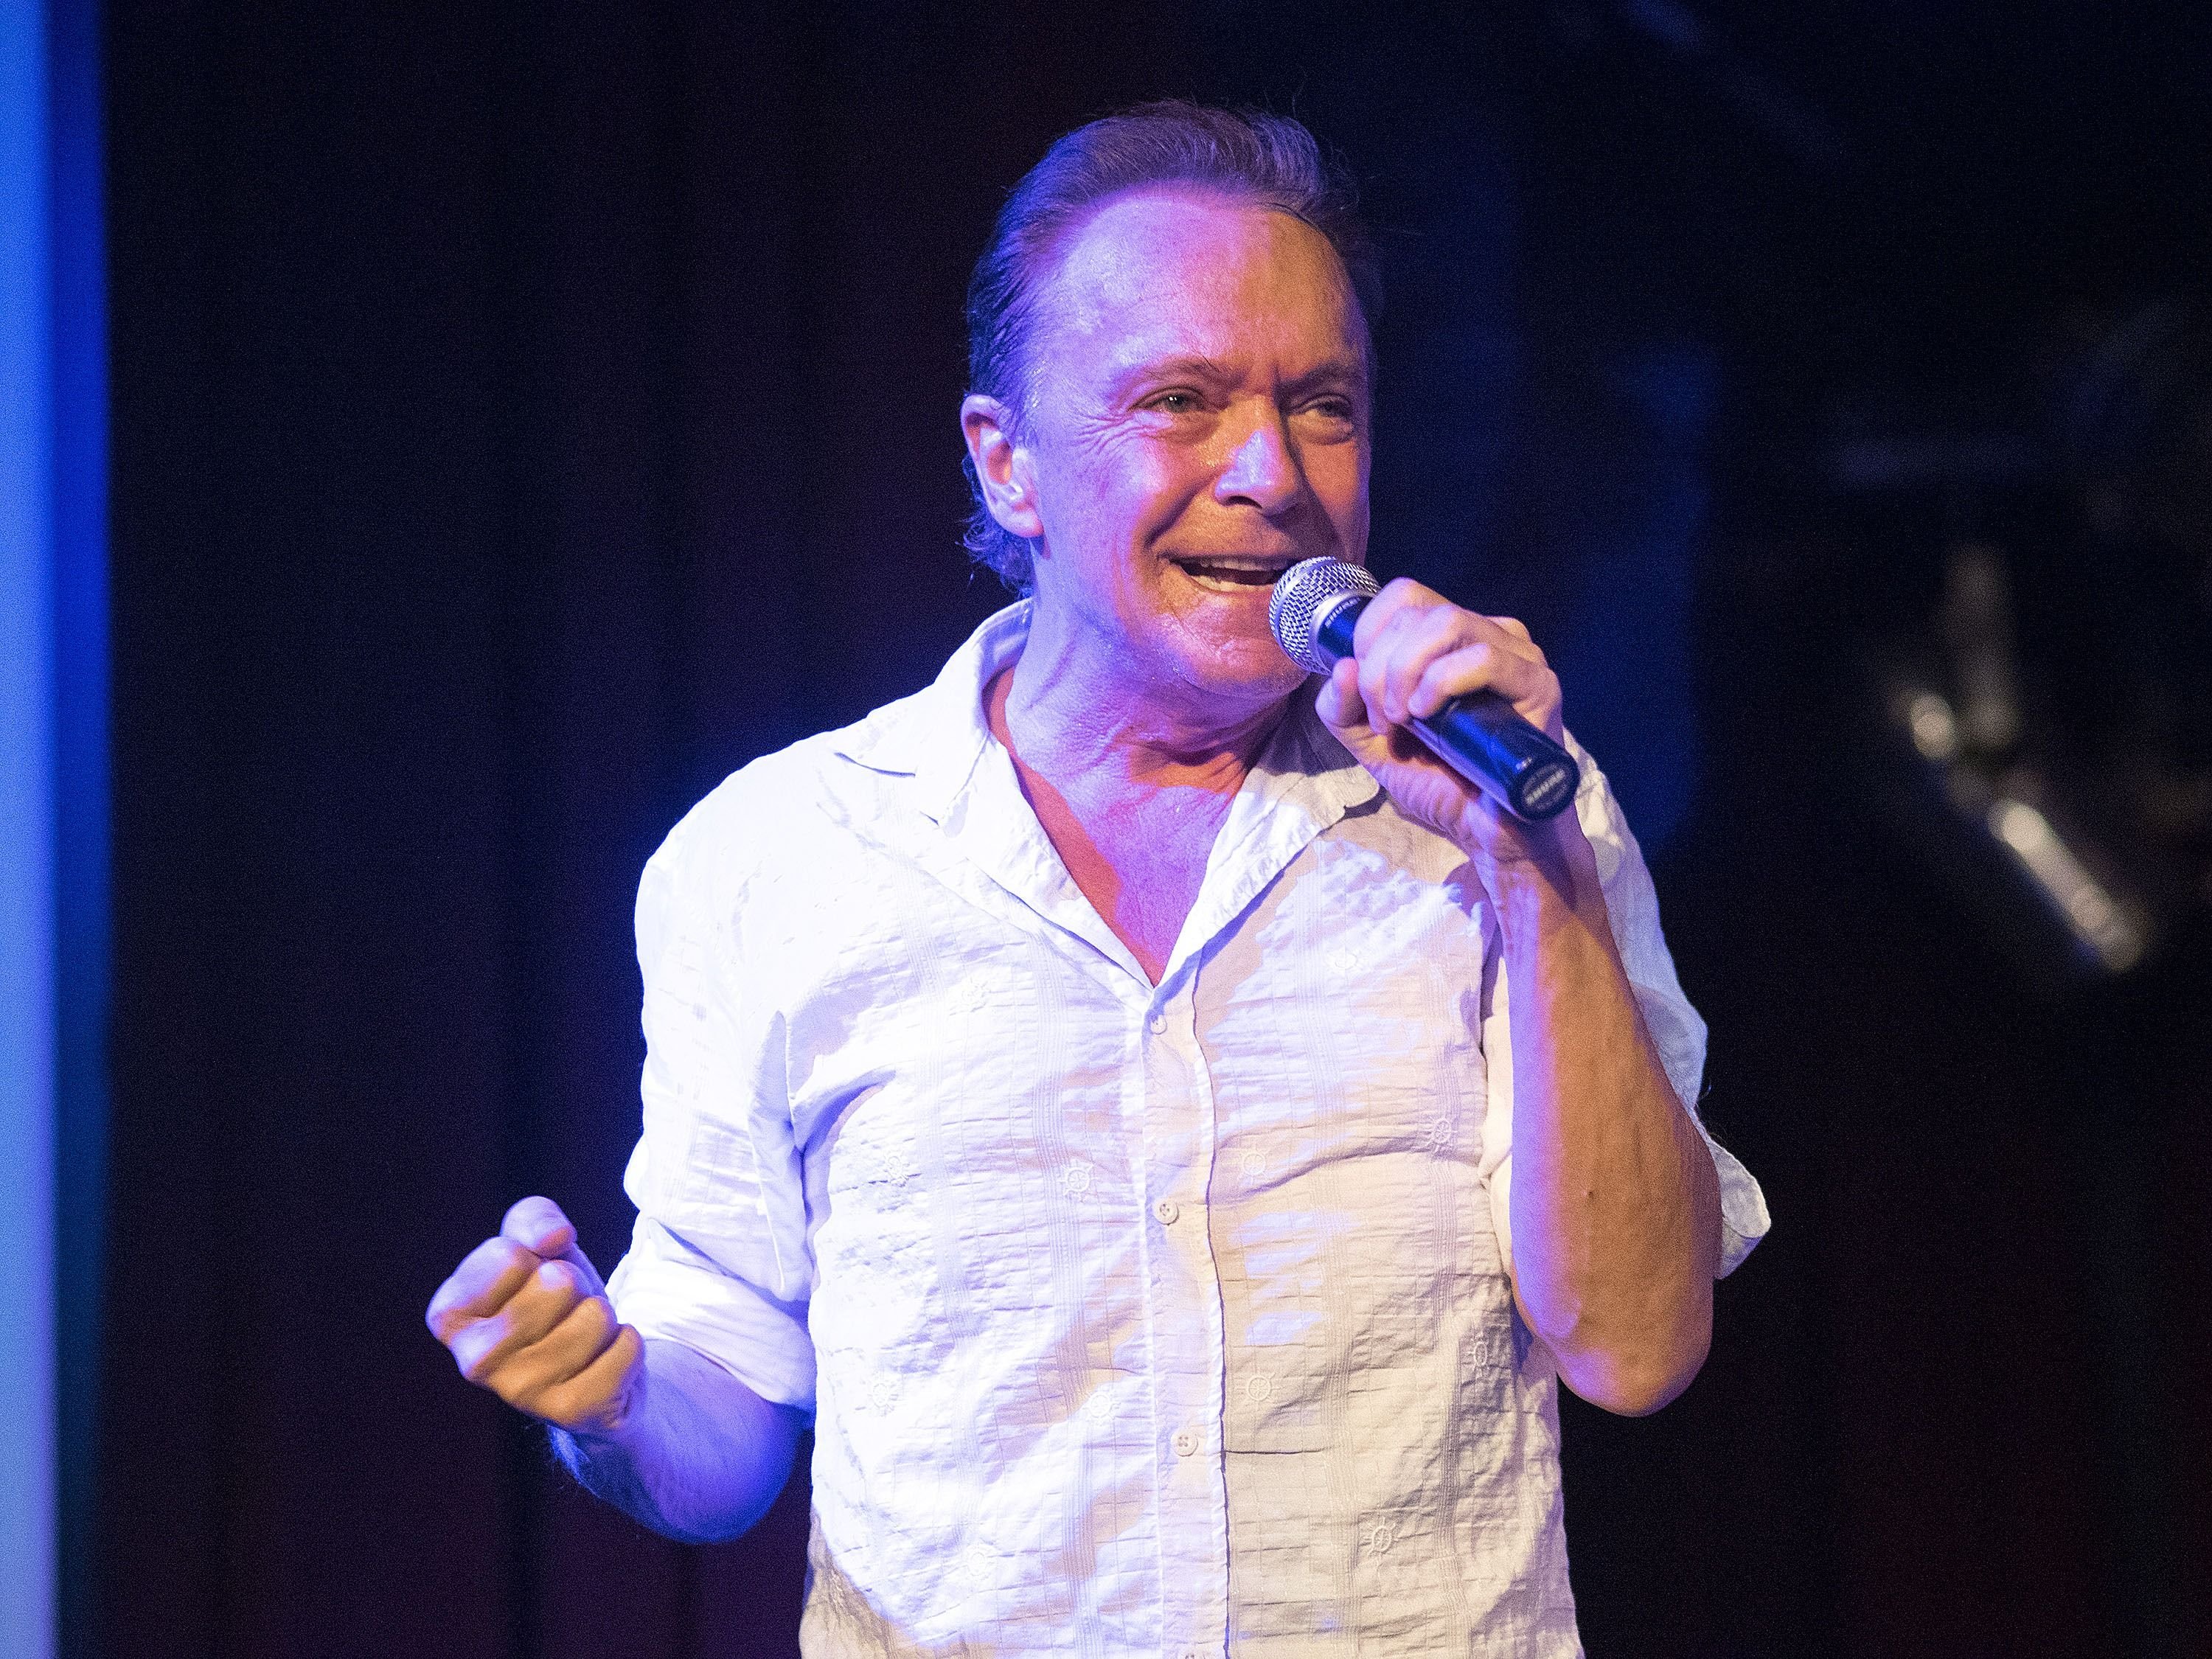 David Cassidy performs at BB King on January 10, 2015, in New York City. | Source: Debra L Rothenberg/Getty Images